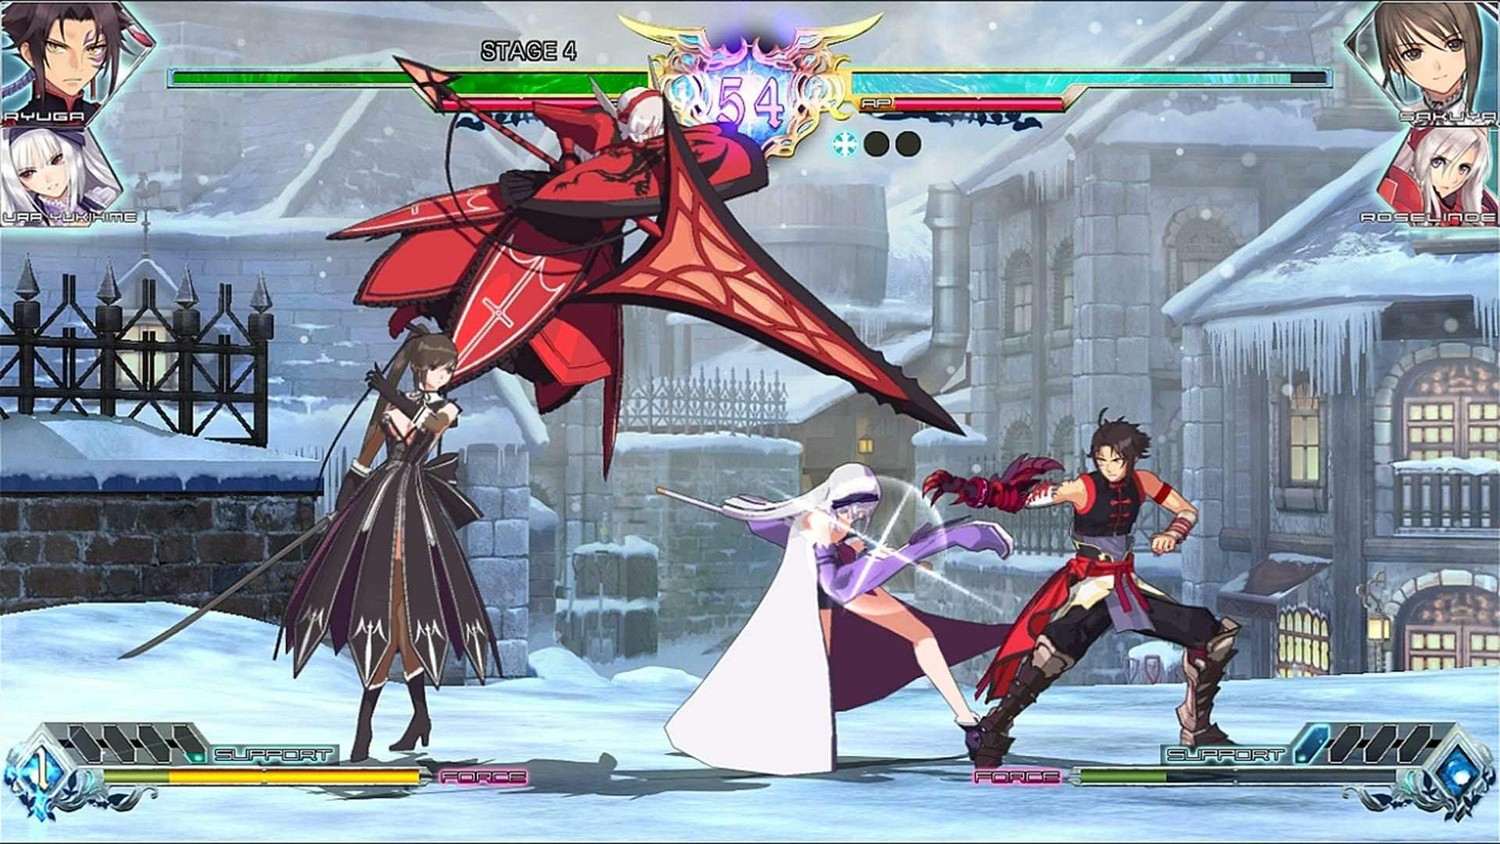 Blade Arcus from Shining: Battle Arena - Скриншот 4